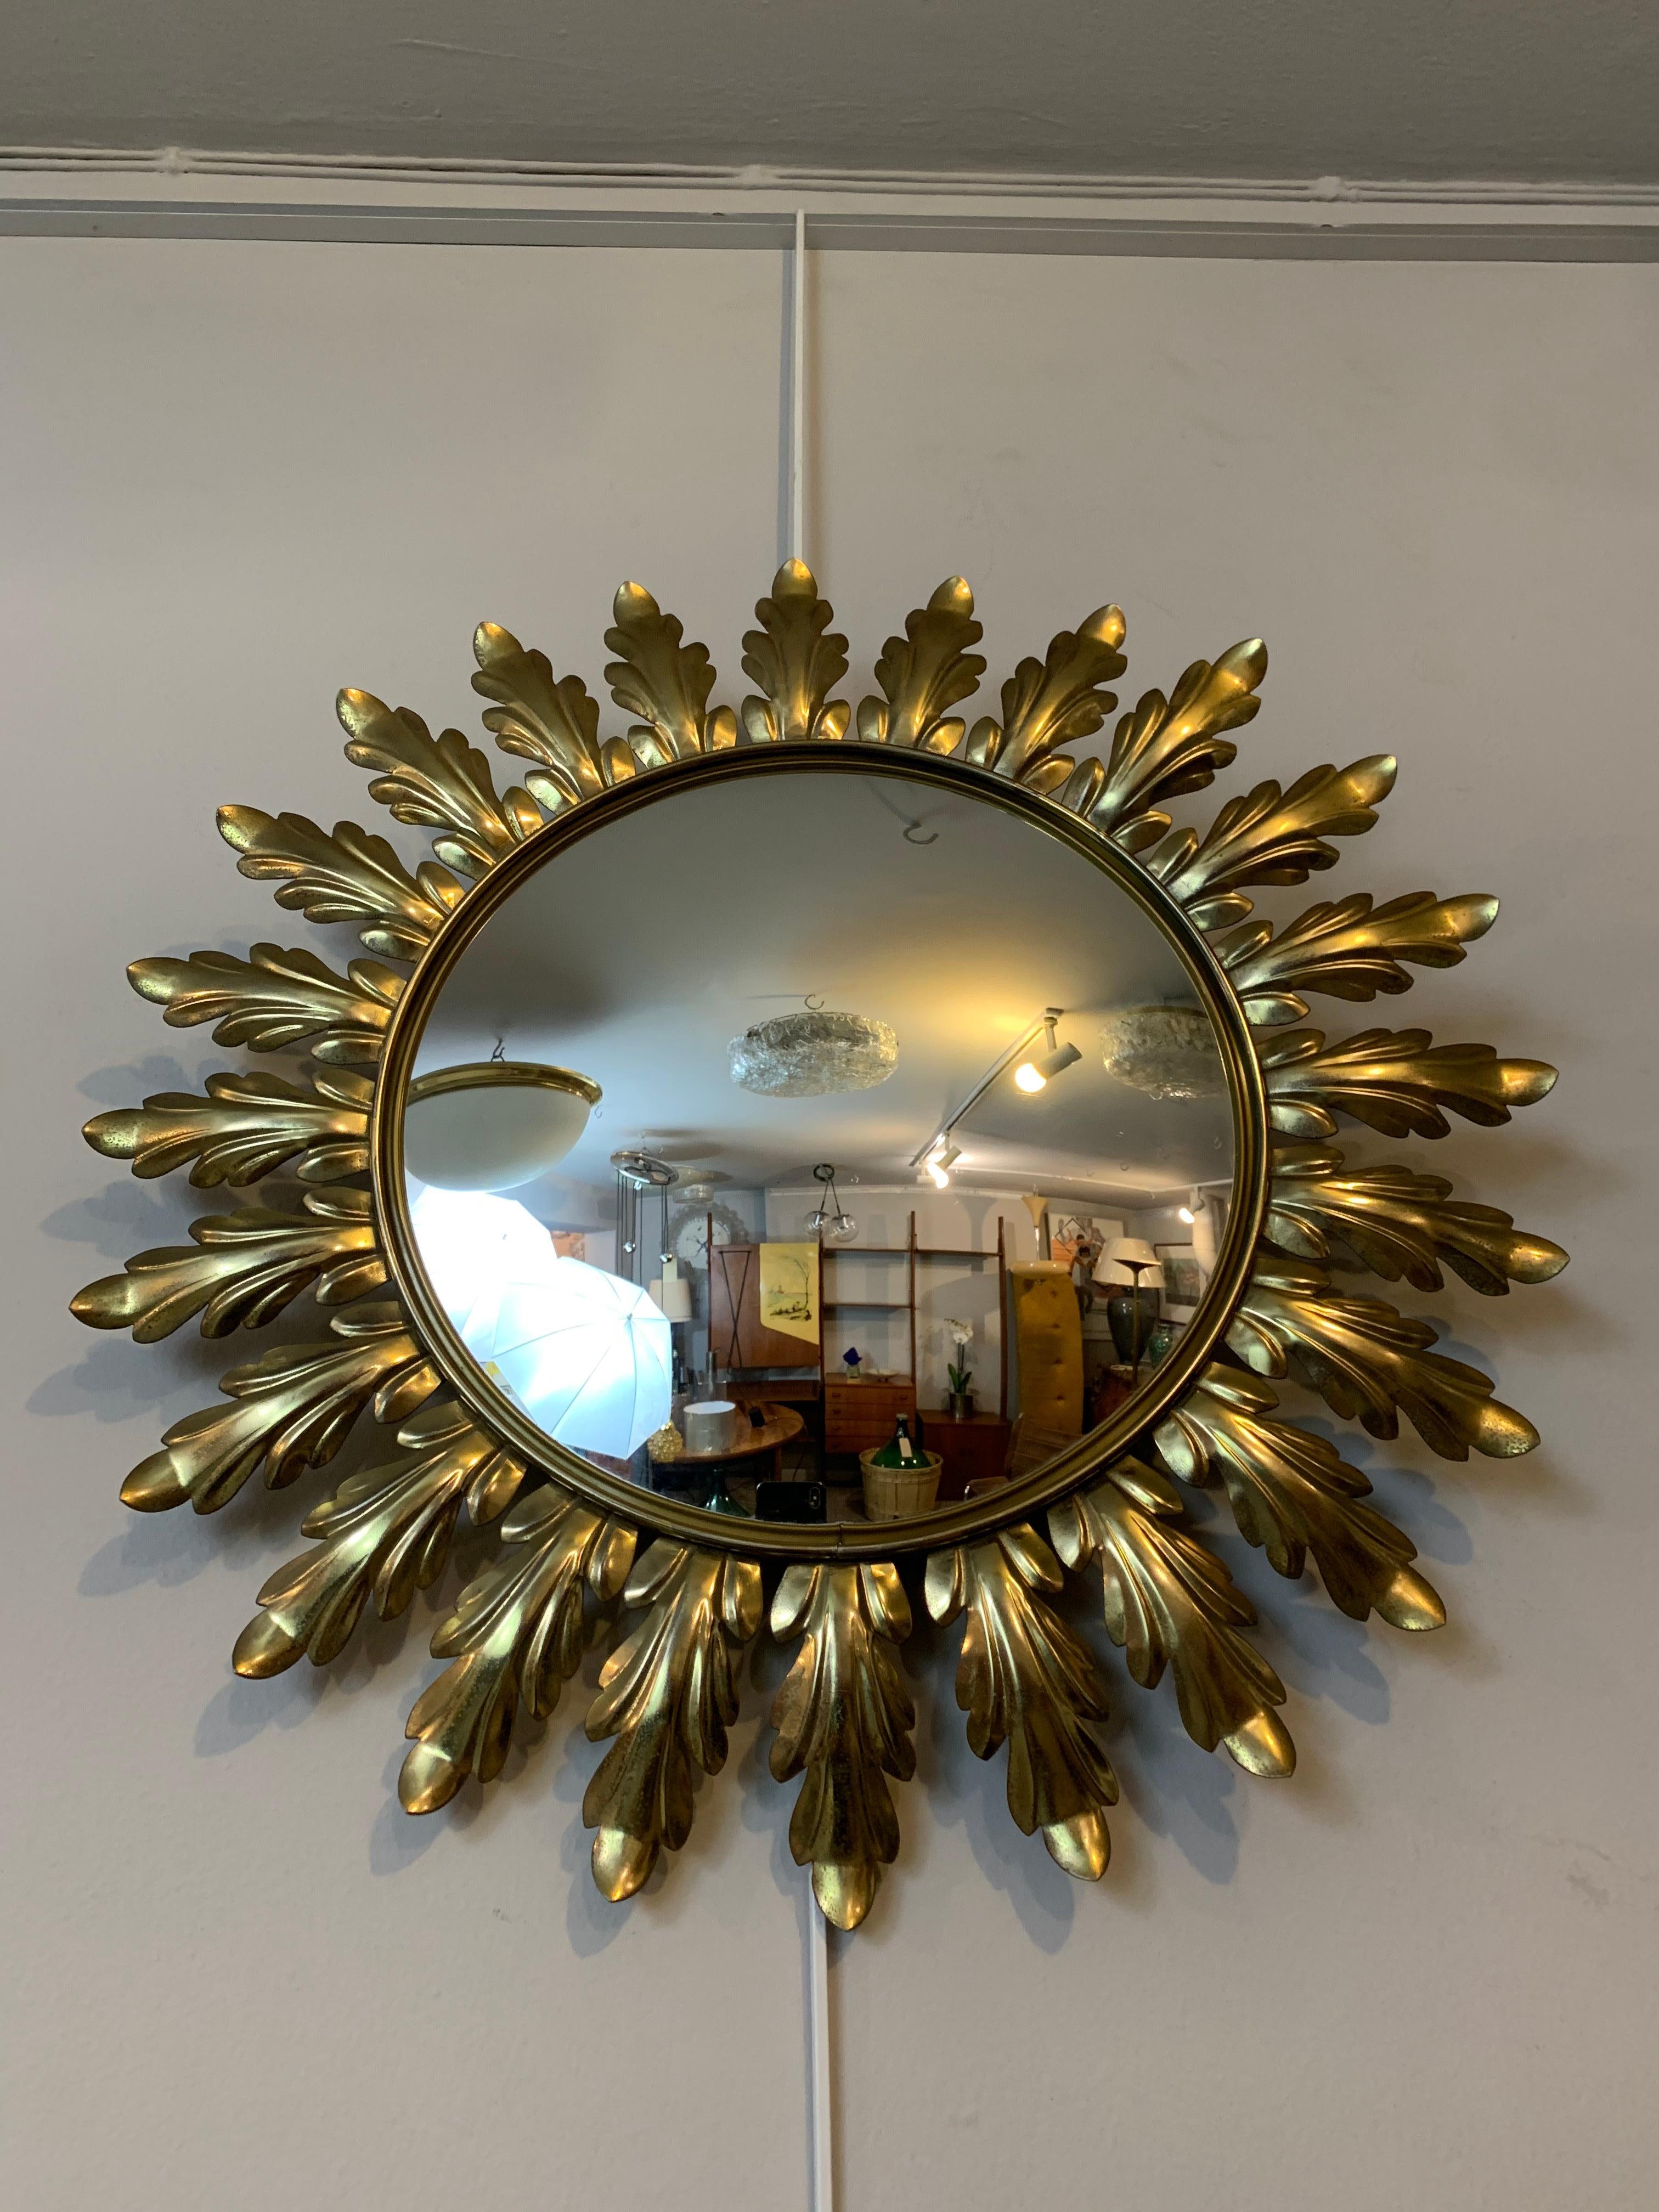 A vintage round wall mirror made in Belgium by Deknudt, circa 1950s. Made with patinated brass leaves which surround the clear glass mirror. The mirror is mounted on a wood backing, covered in aged felt to protect the wall from being scratched. The